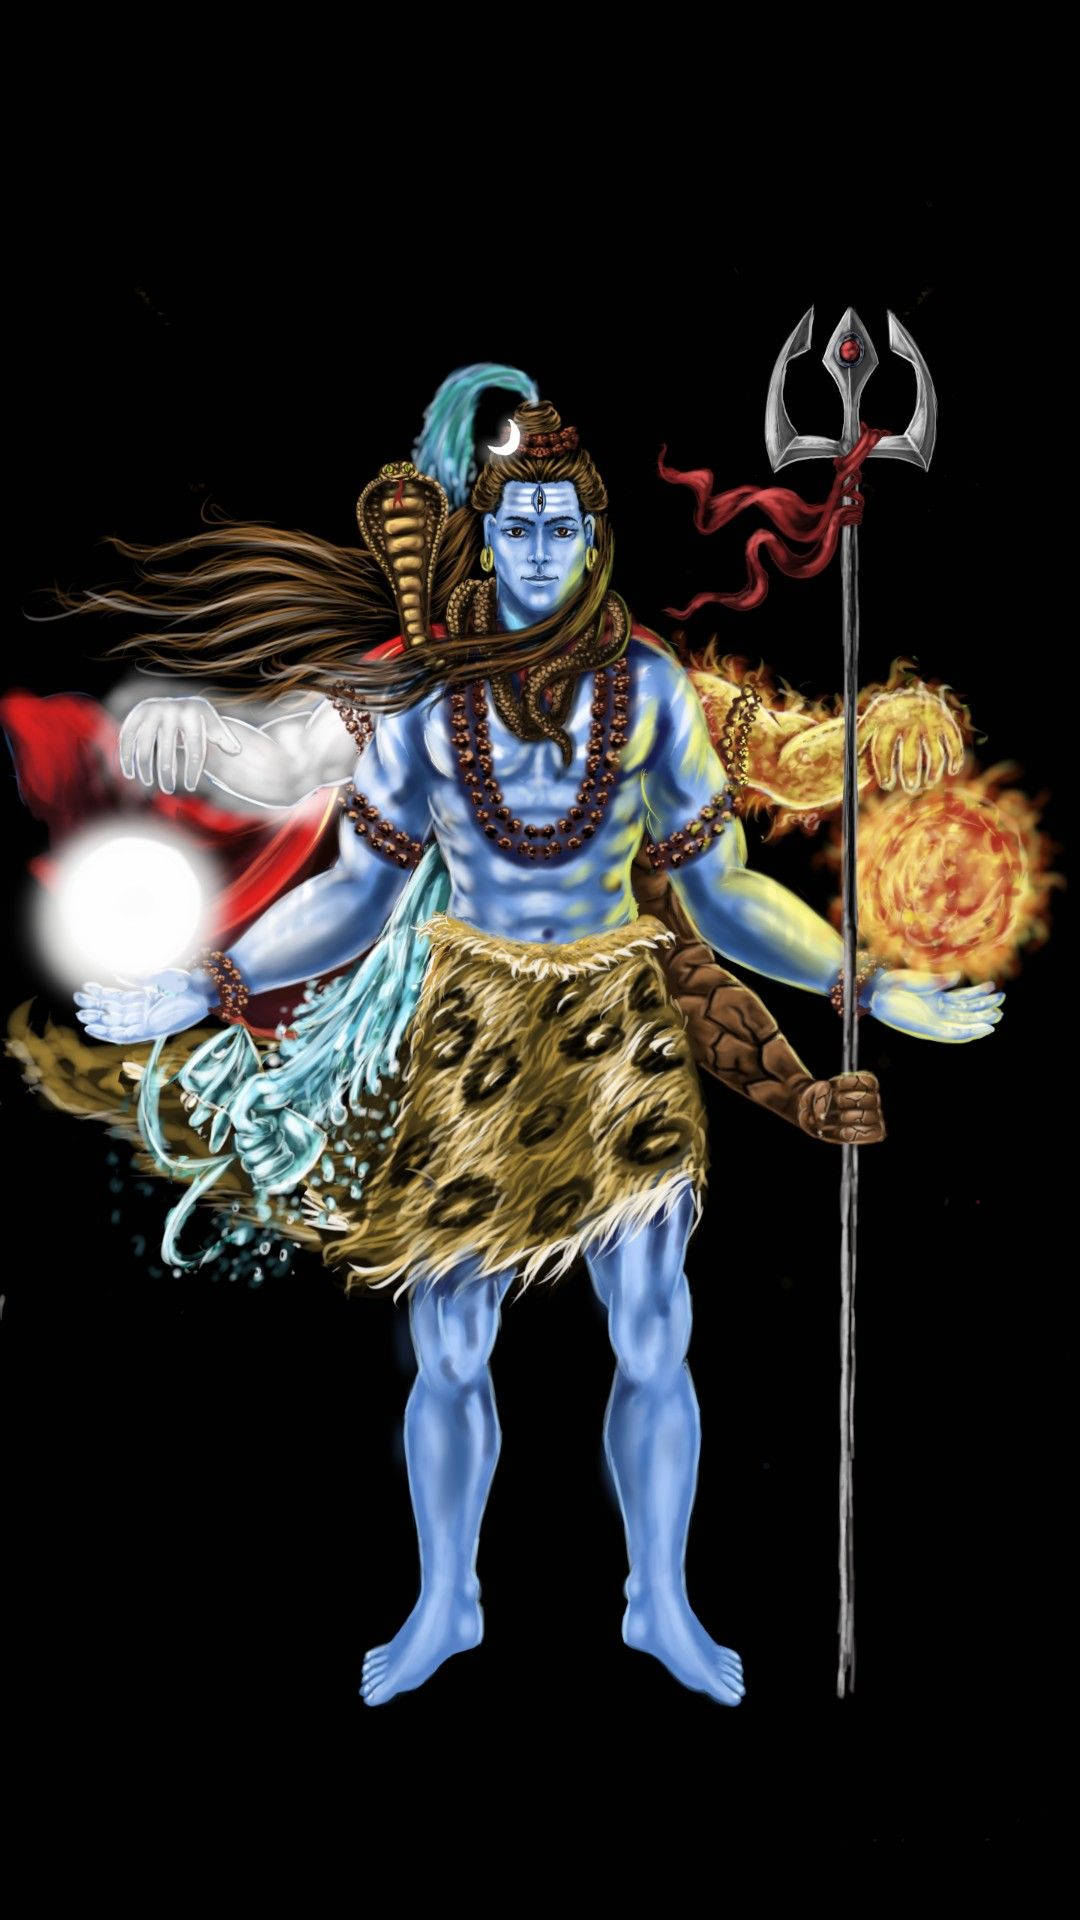 Lord Shiva Angry With Three Hands